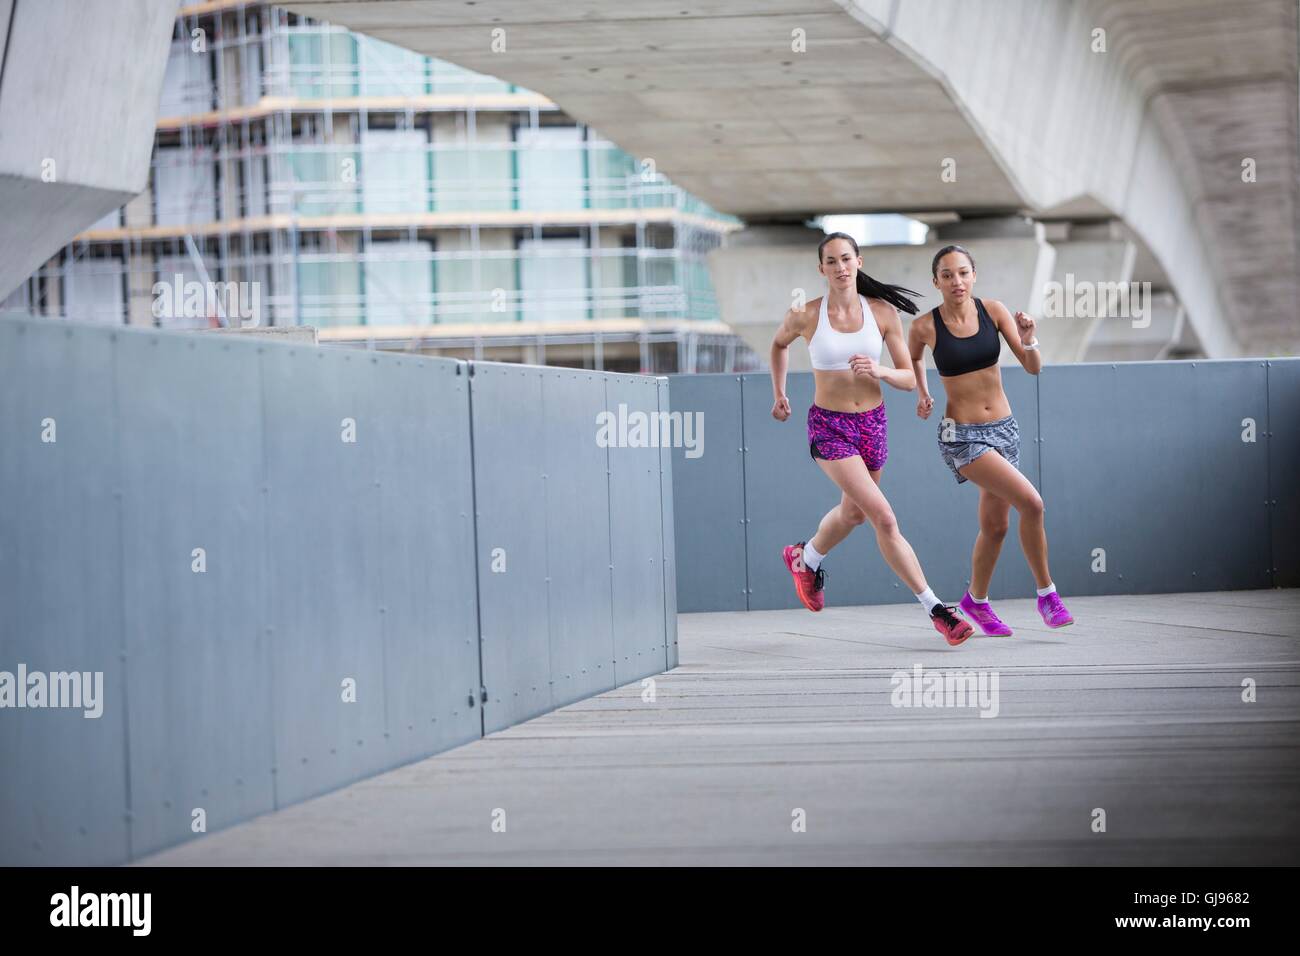 MODEL RELEASED. Two young women racing. Stock Photo